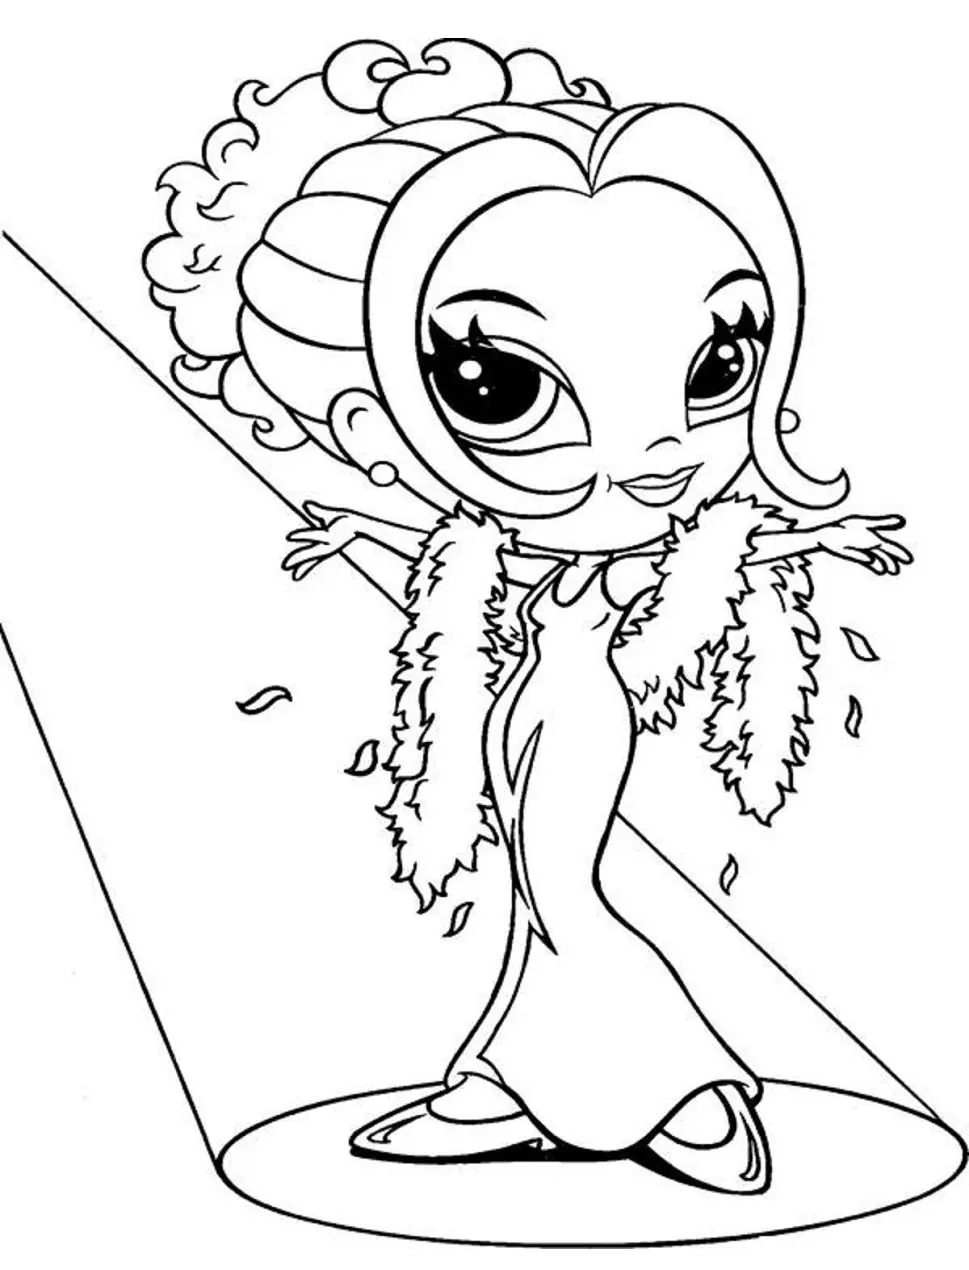 Y2K Coloring Pages